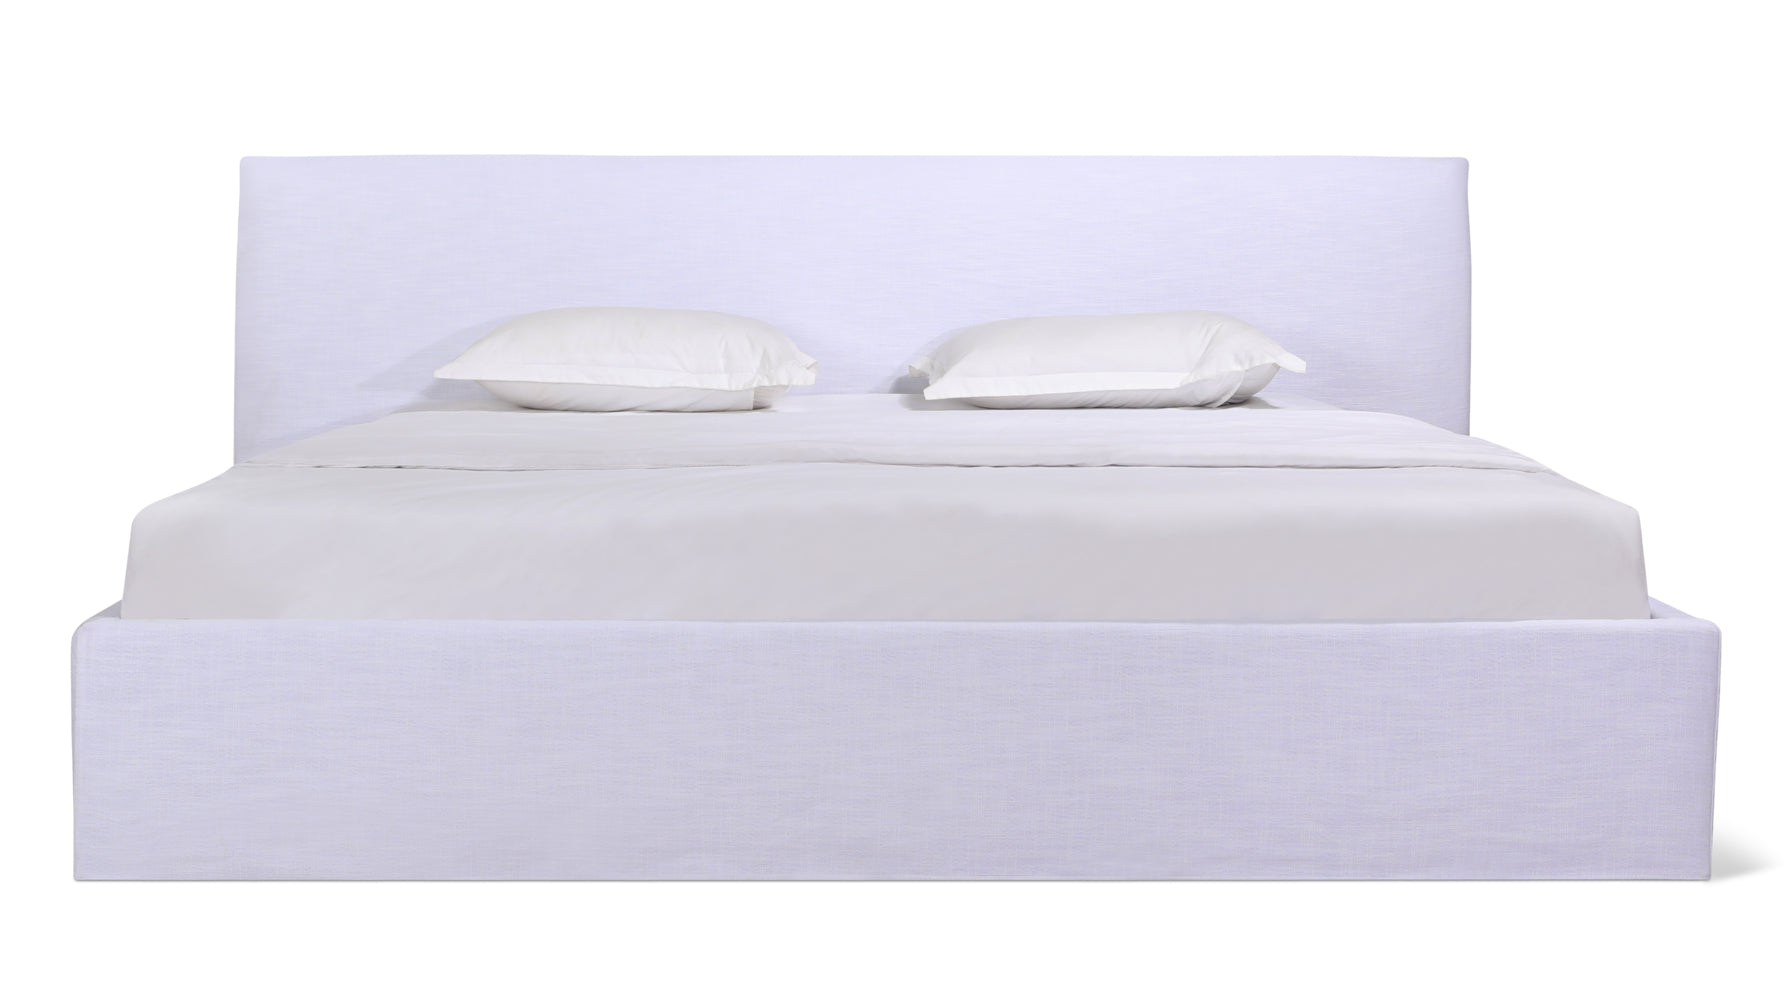 Wave Bed with Storage, King, White - Image 1